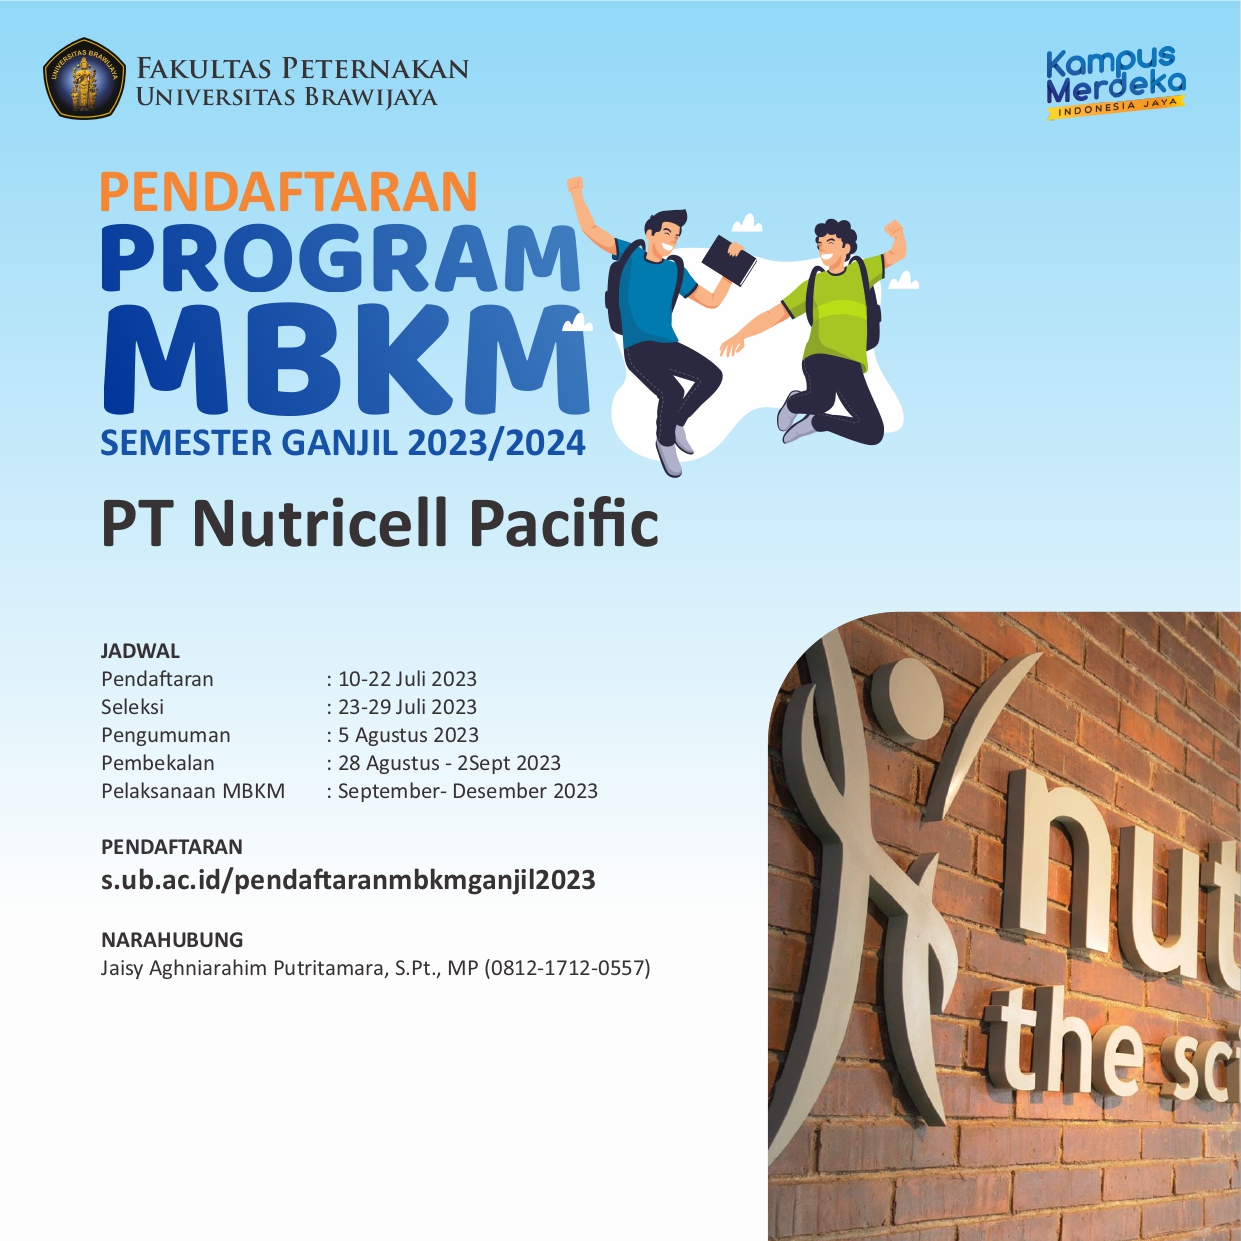 Registration of MBKM PT Nutricell Pacific